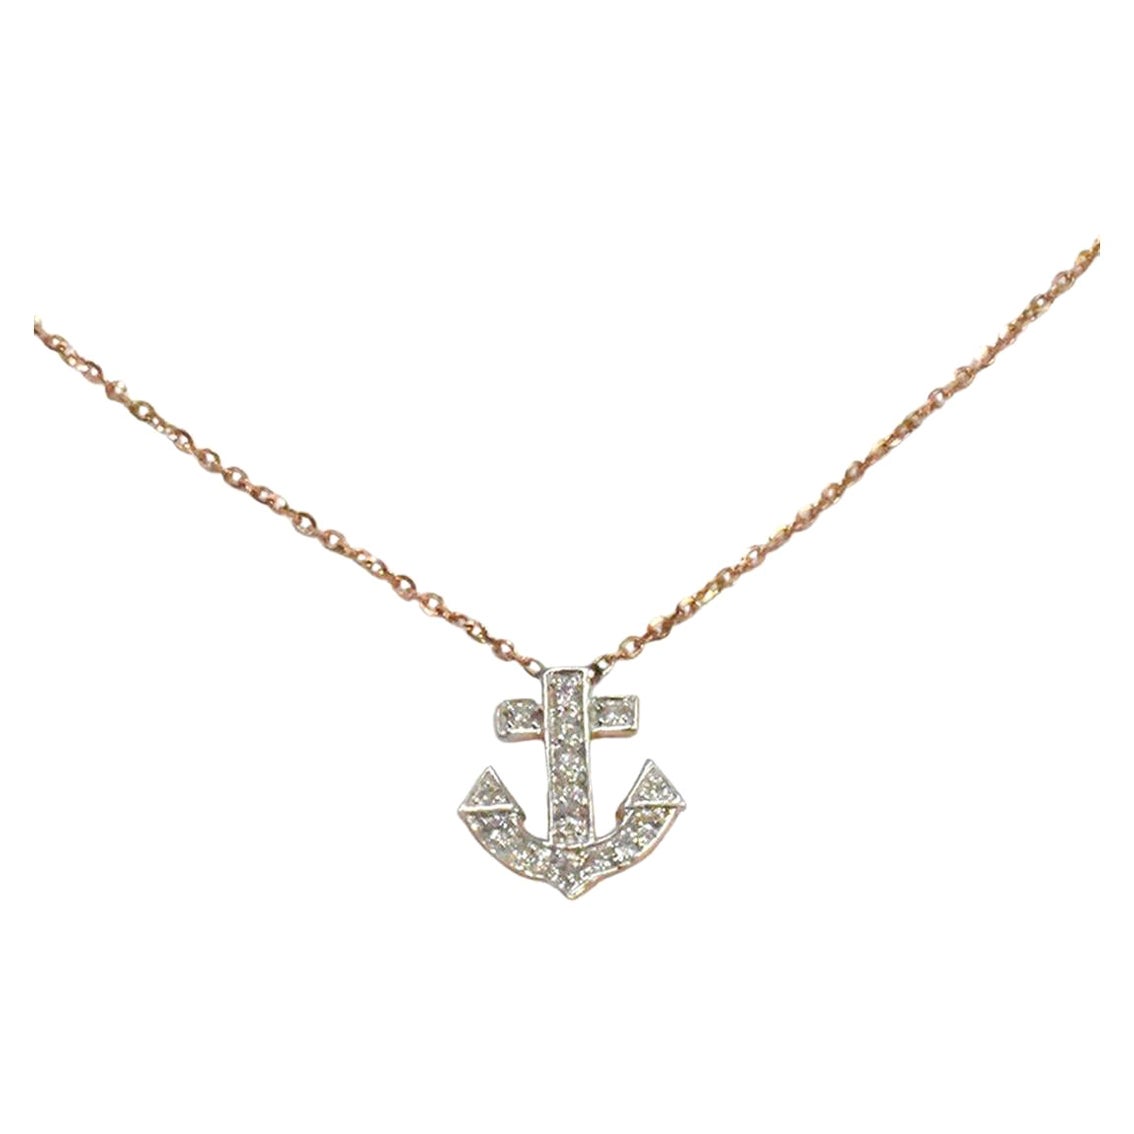 Diamond Anchor Pendant Necklace is made of 18k solid gold.
Available in three colors of gold: White Gold / Rose Gold / Yellow Gold.

Lightweight and gorgeous natural genuine round cut diamond. Each diamond is hand selected by me to ensure quality